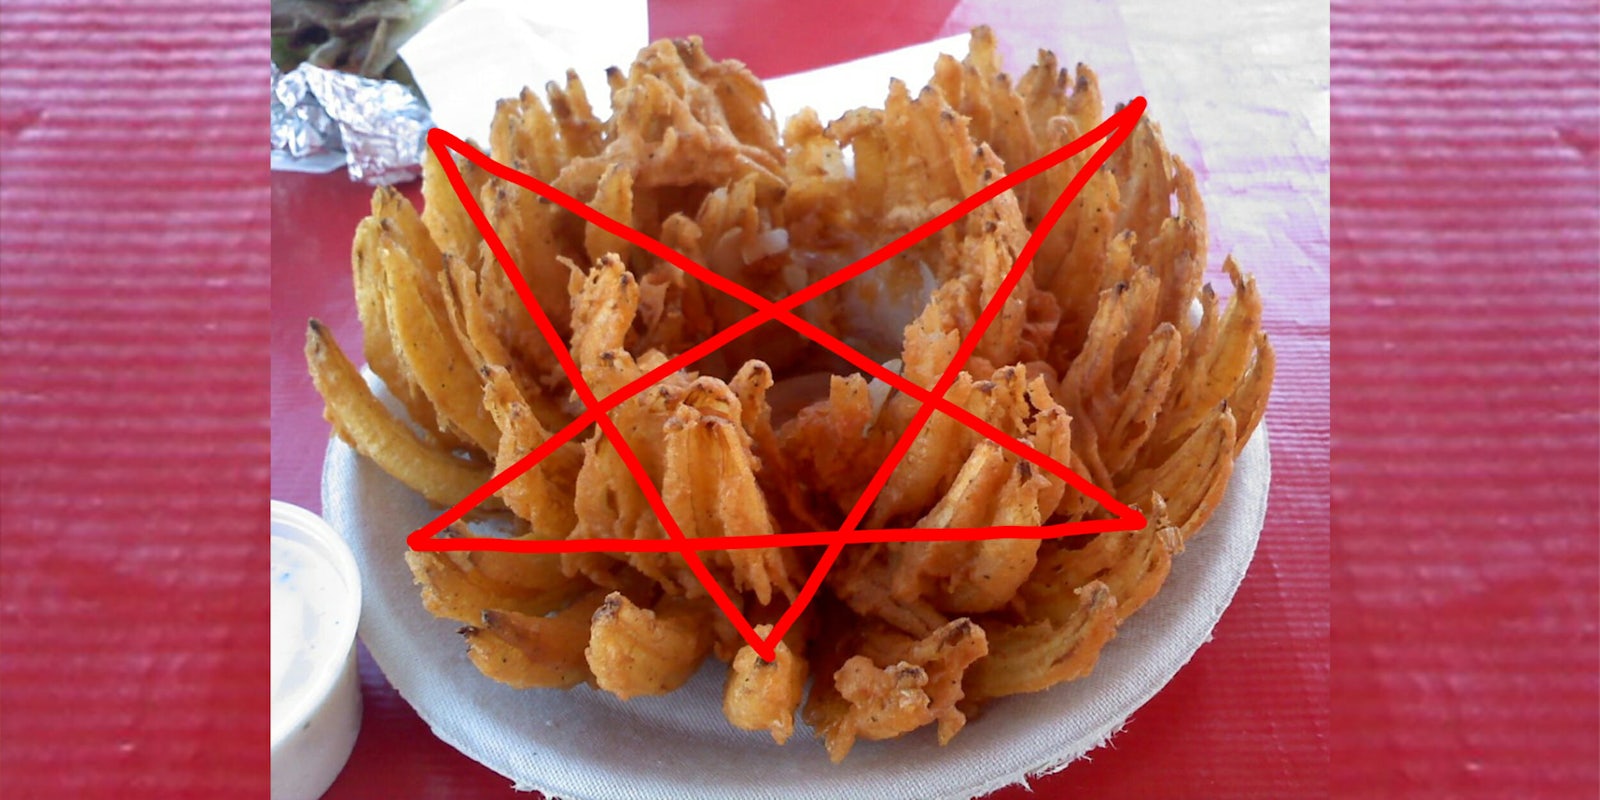 Pentagram drawn in red on picture of an Outback Steakhouse 'Blooming Onion'